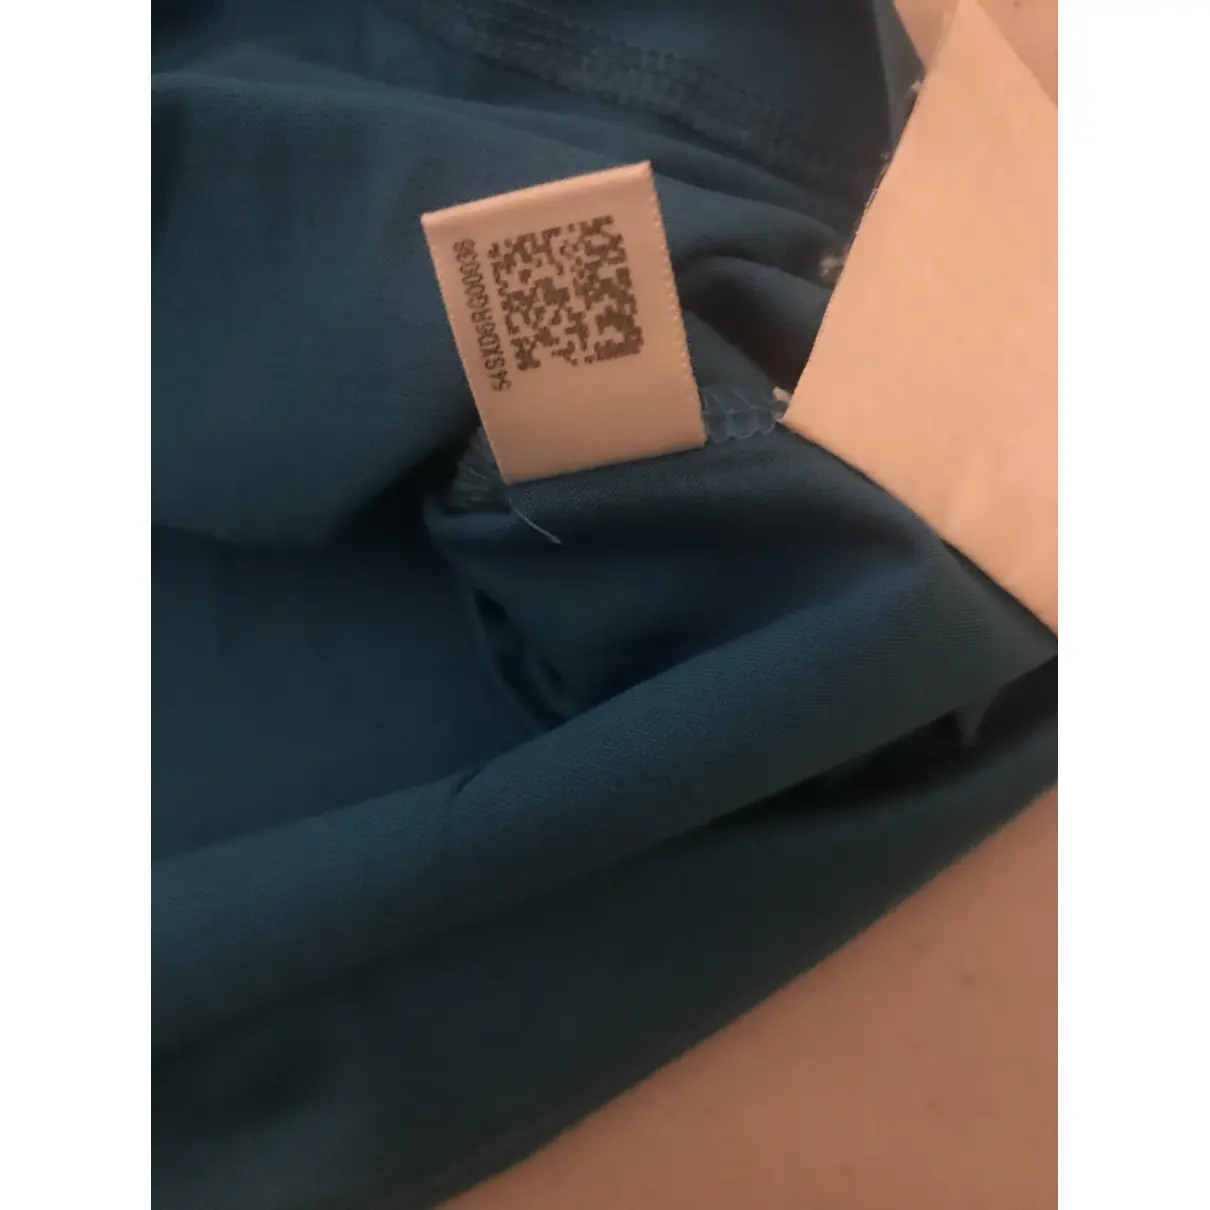 Turquoise Cotton T-shirt Y-3